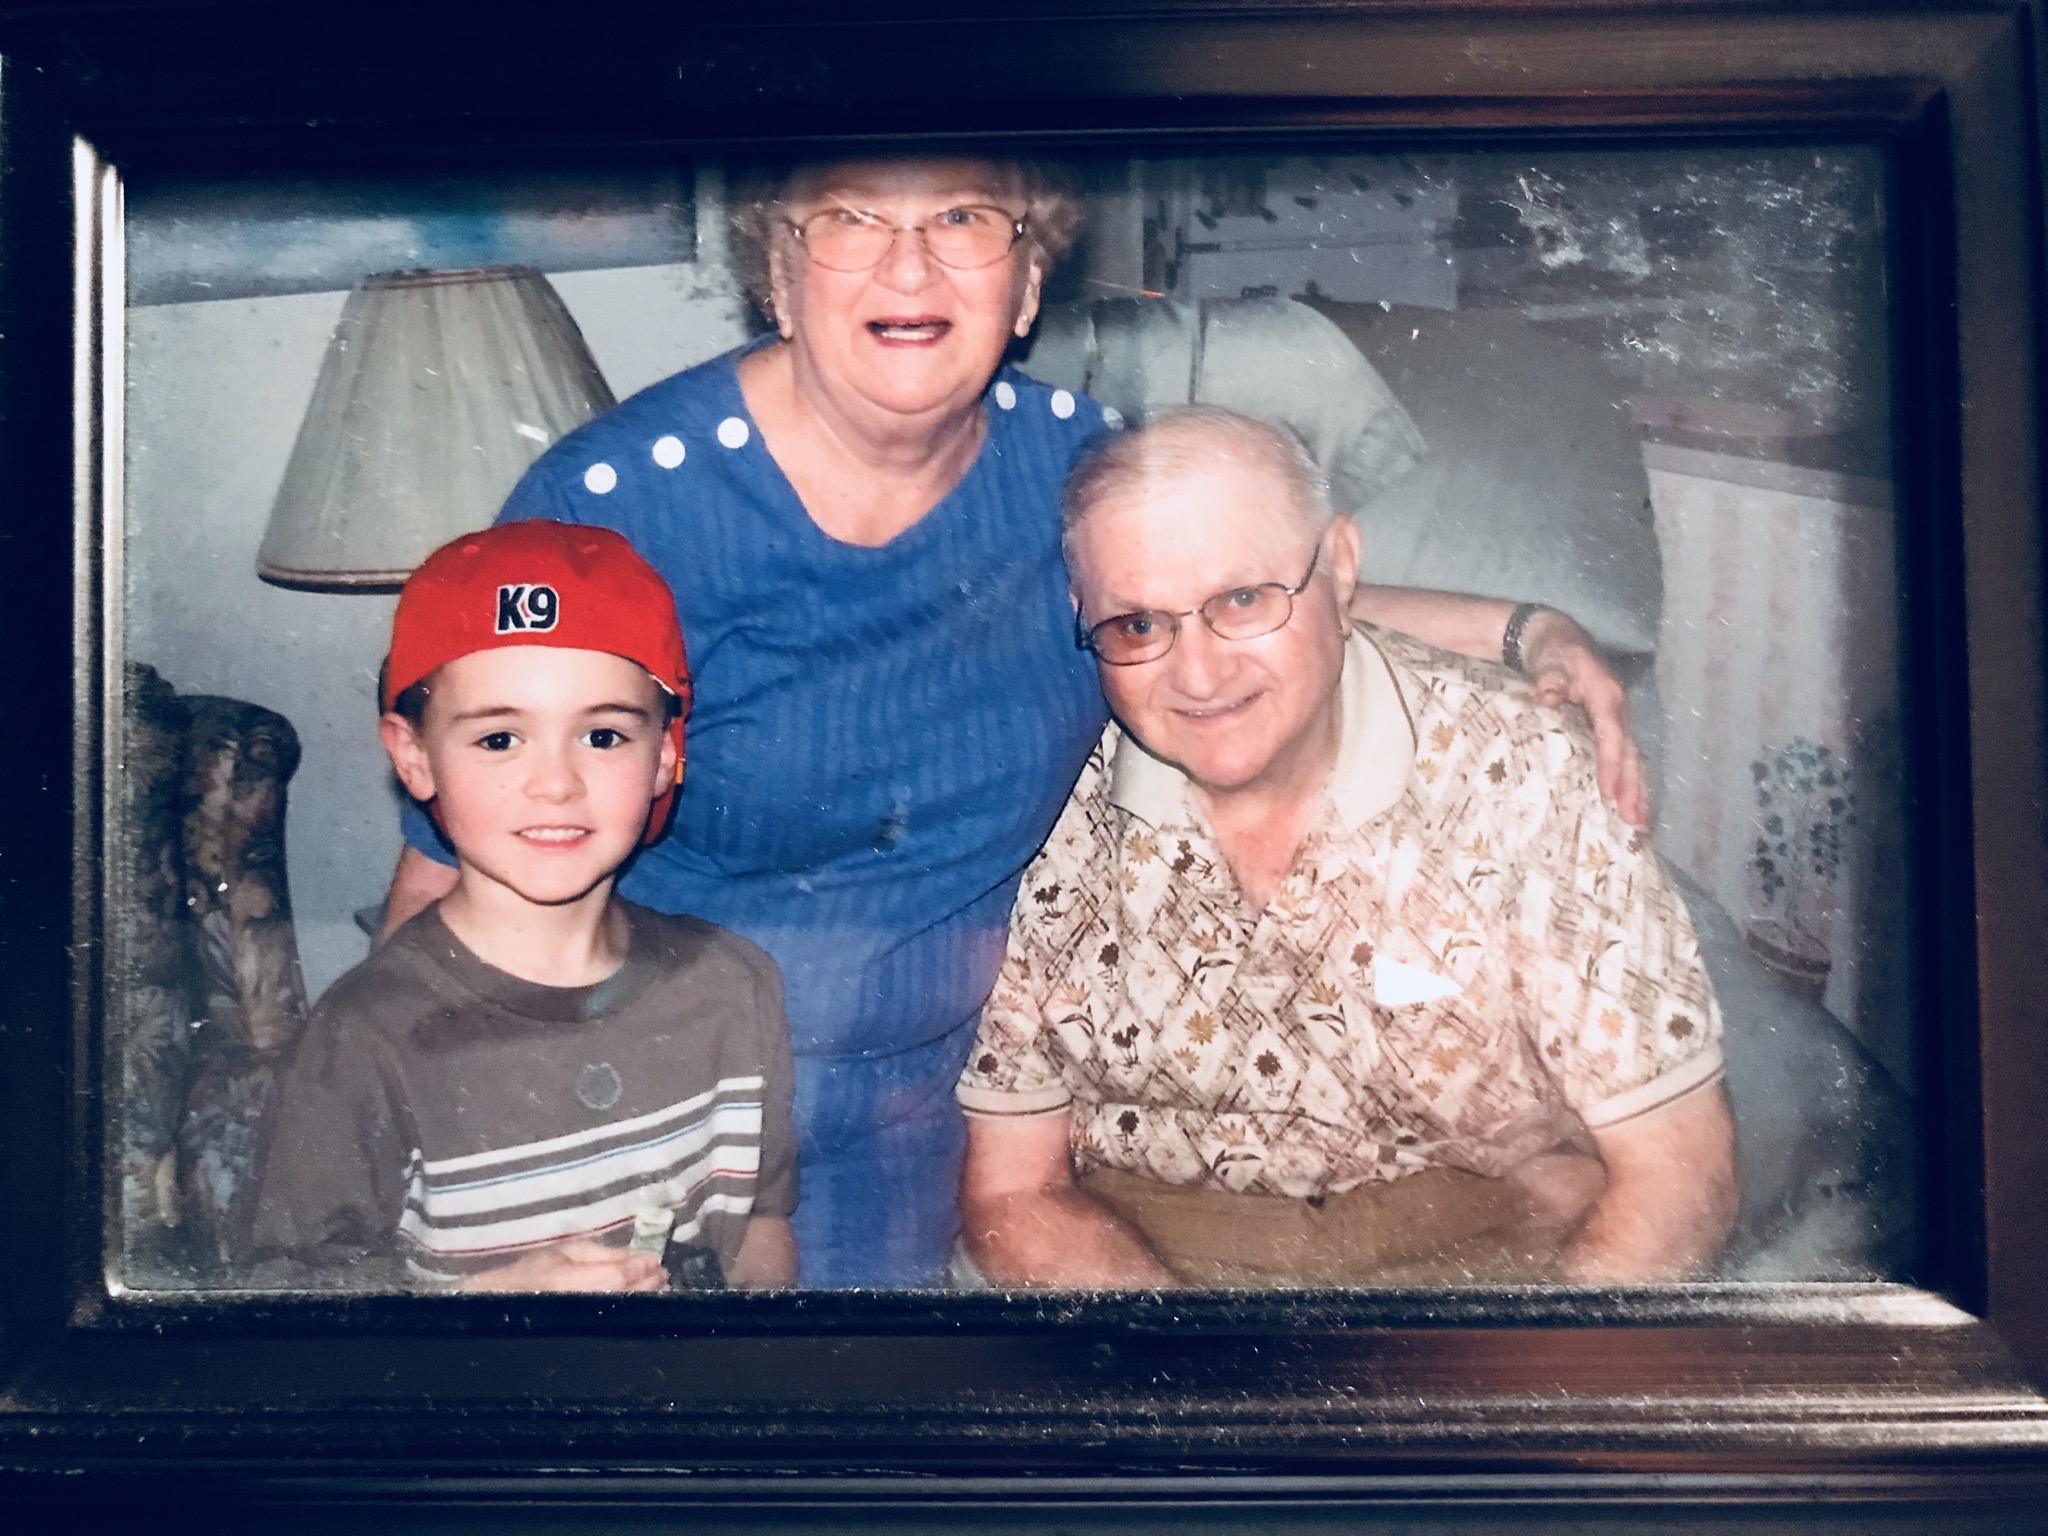 Braden, grandma and grandpa. He loves you so much. Watch over him